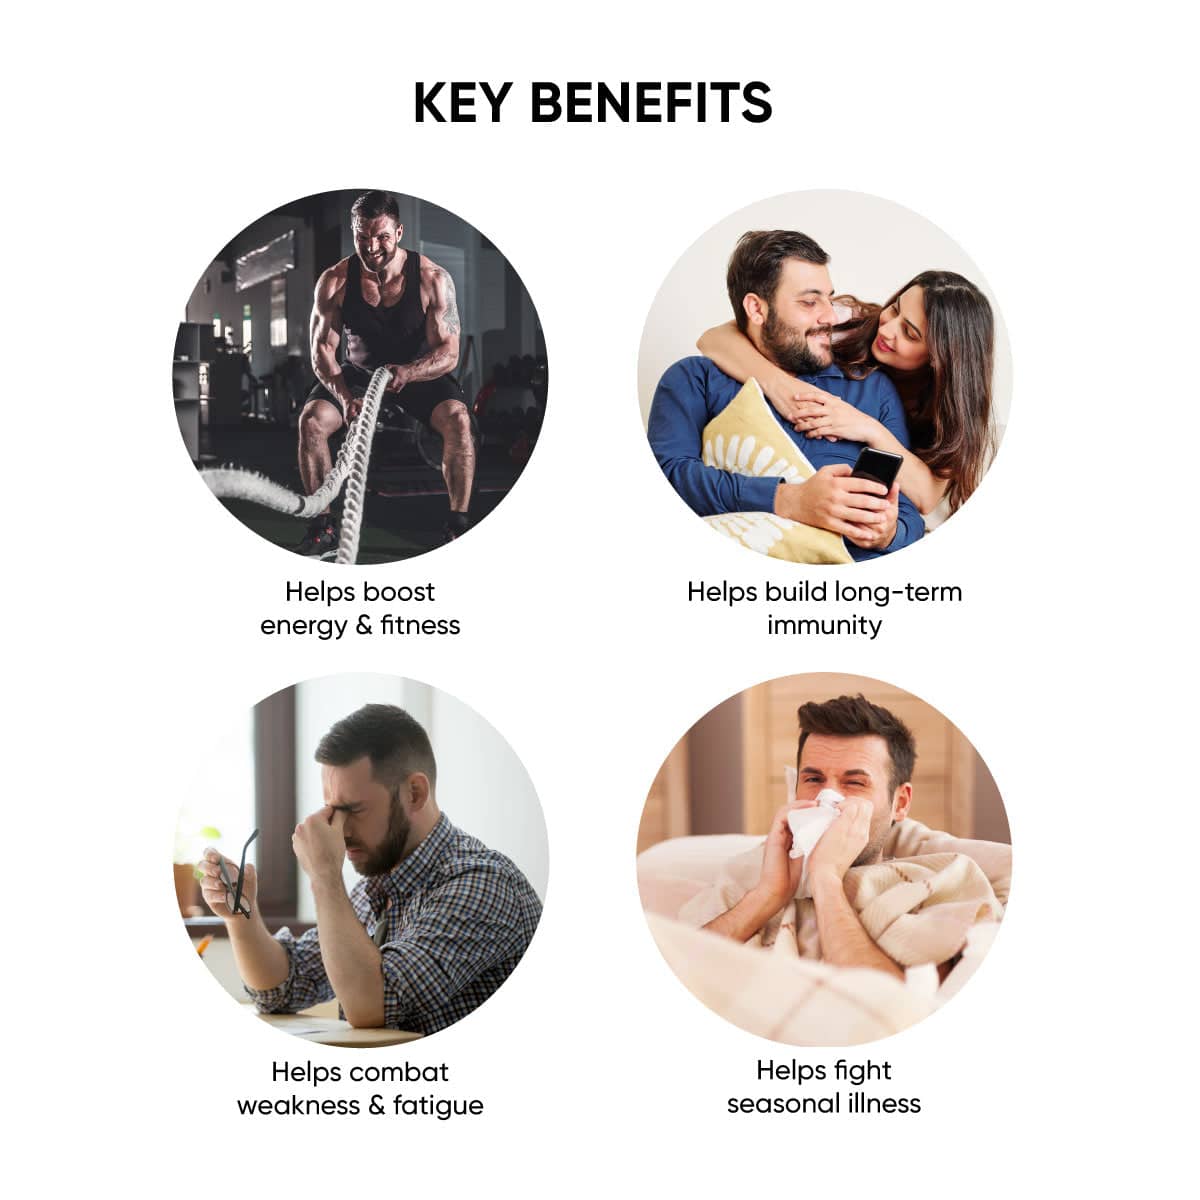 Fitness Pack: For Helping You Achieve Your Fitness Goals